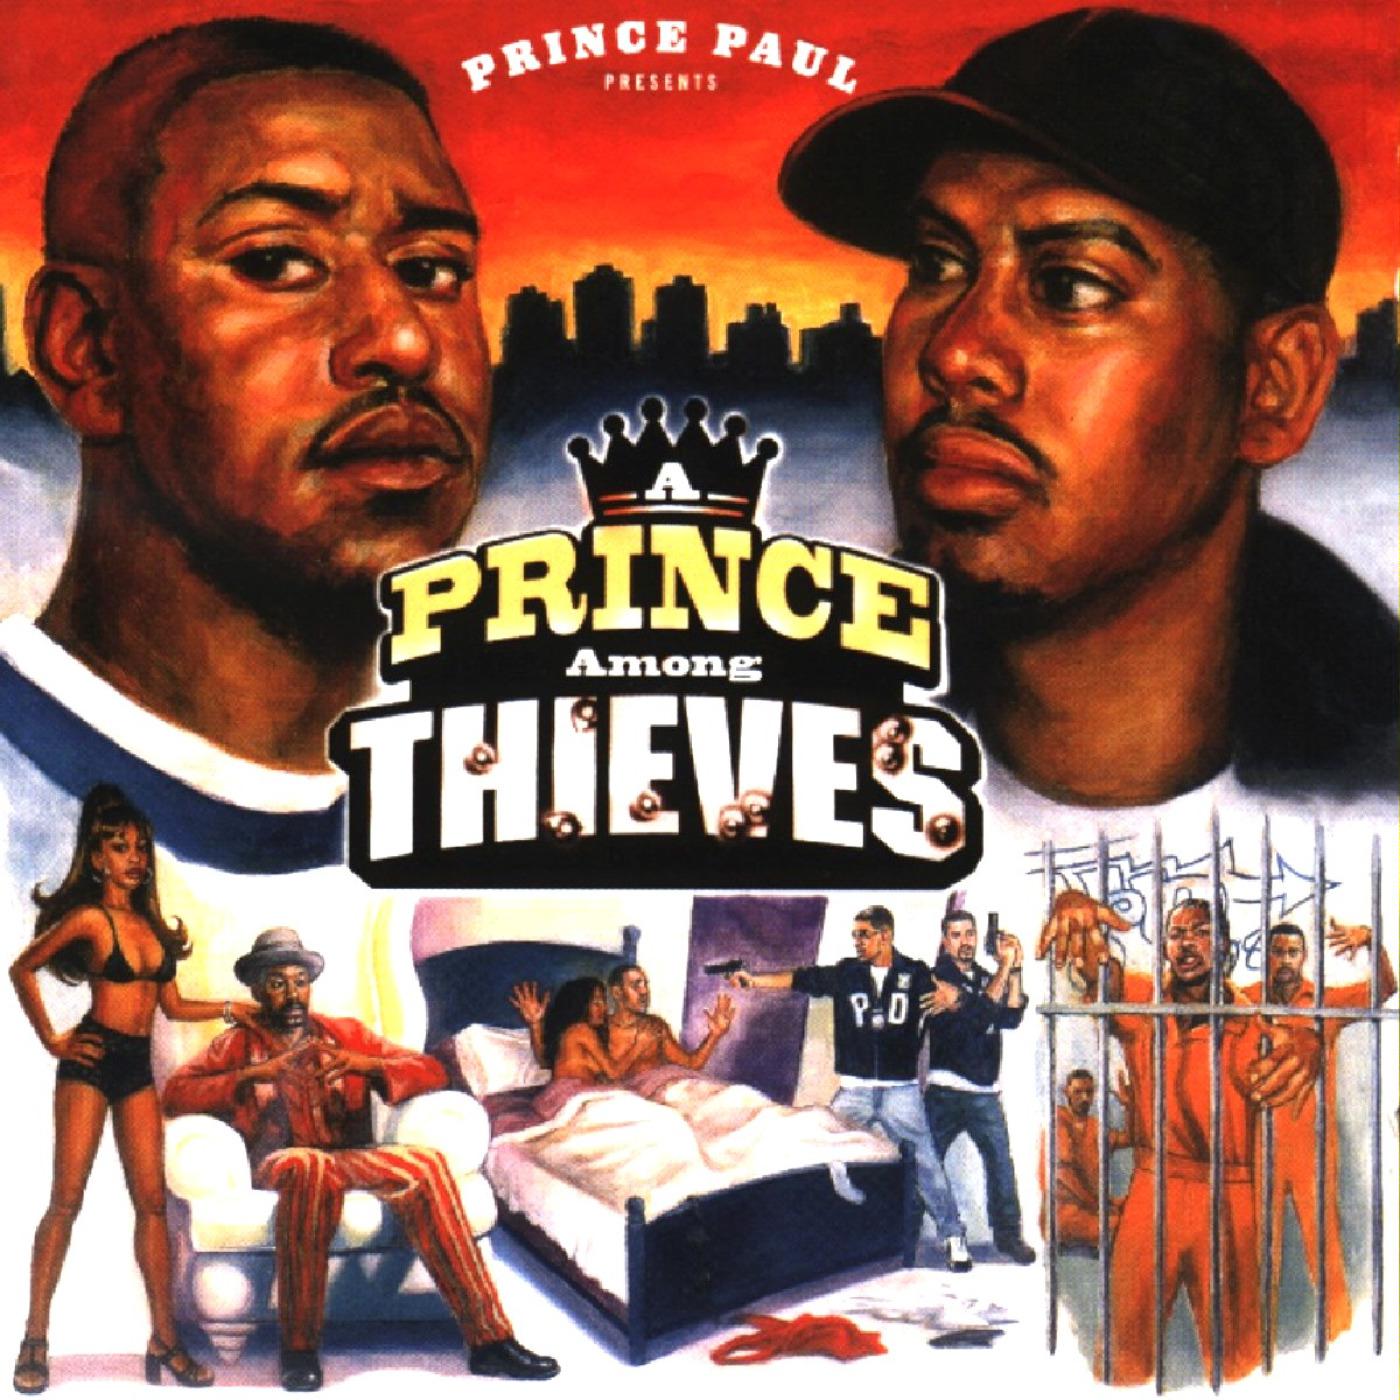 Prince Paul - The Other Line